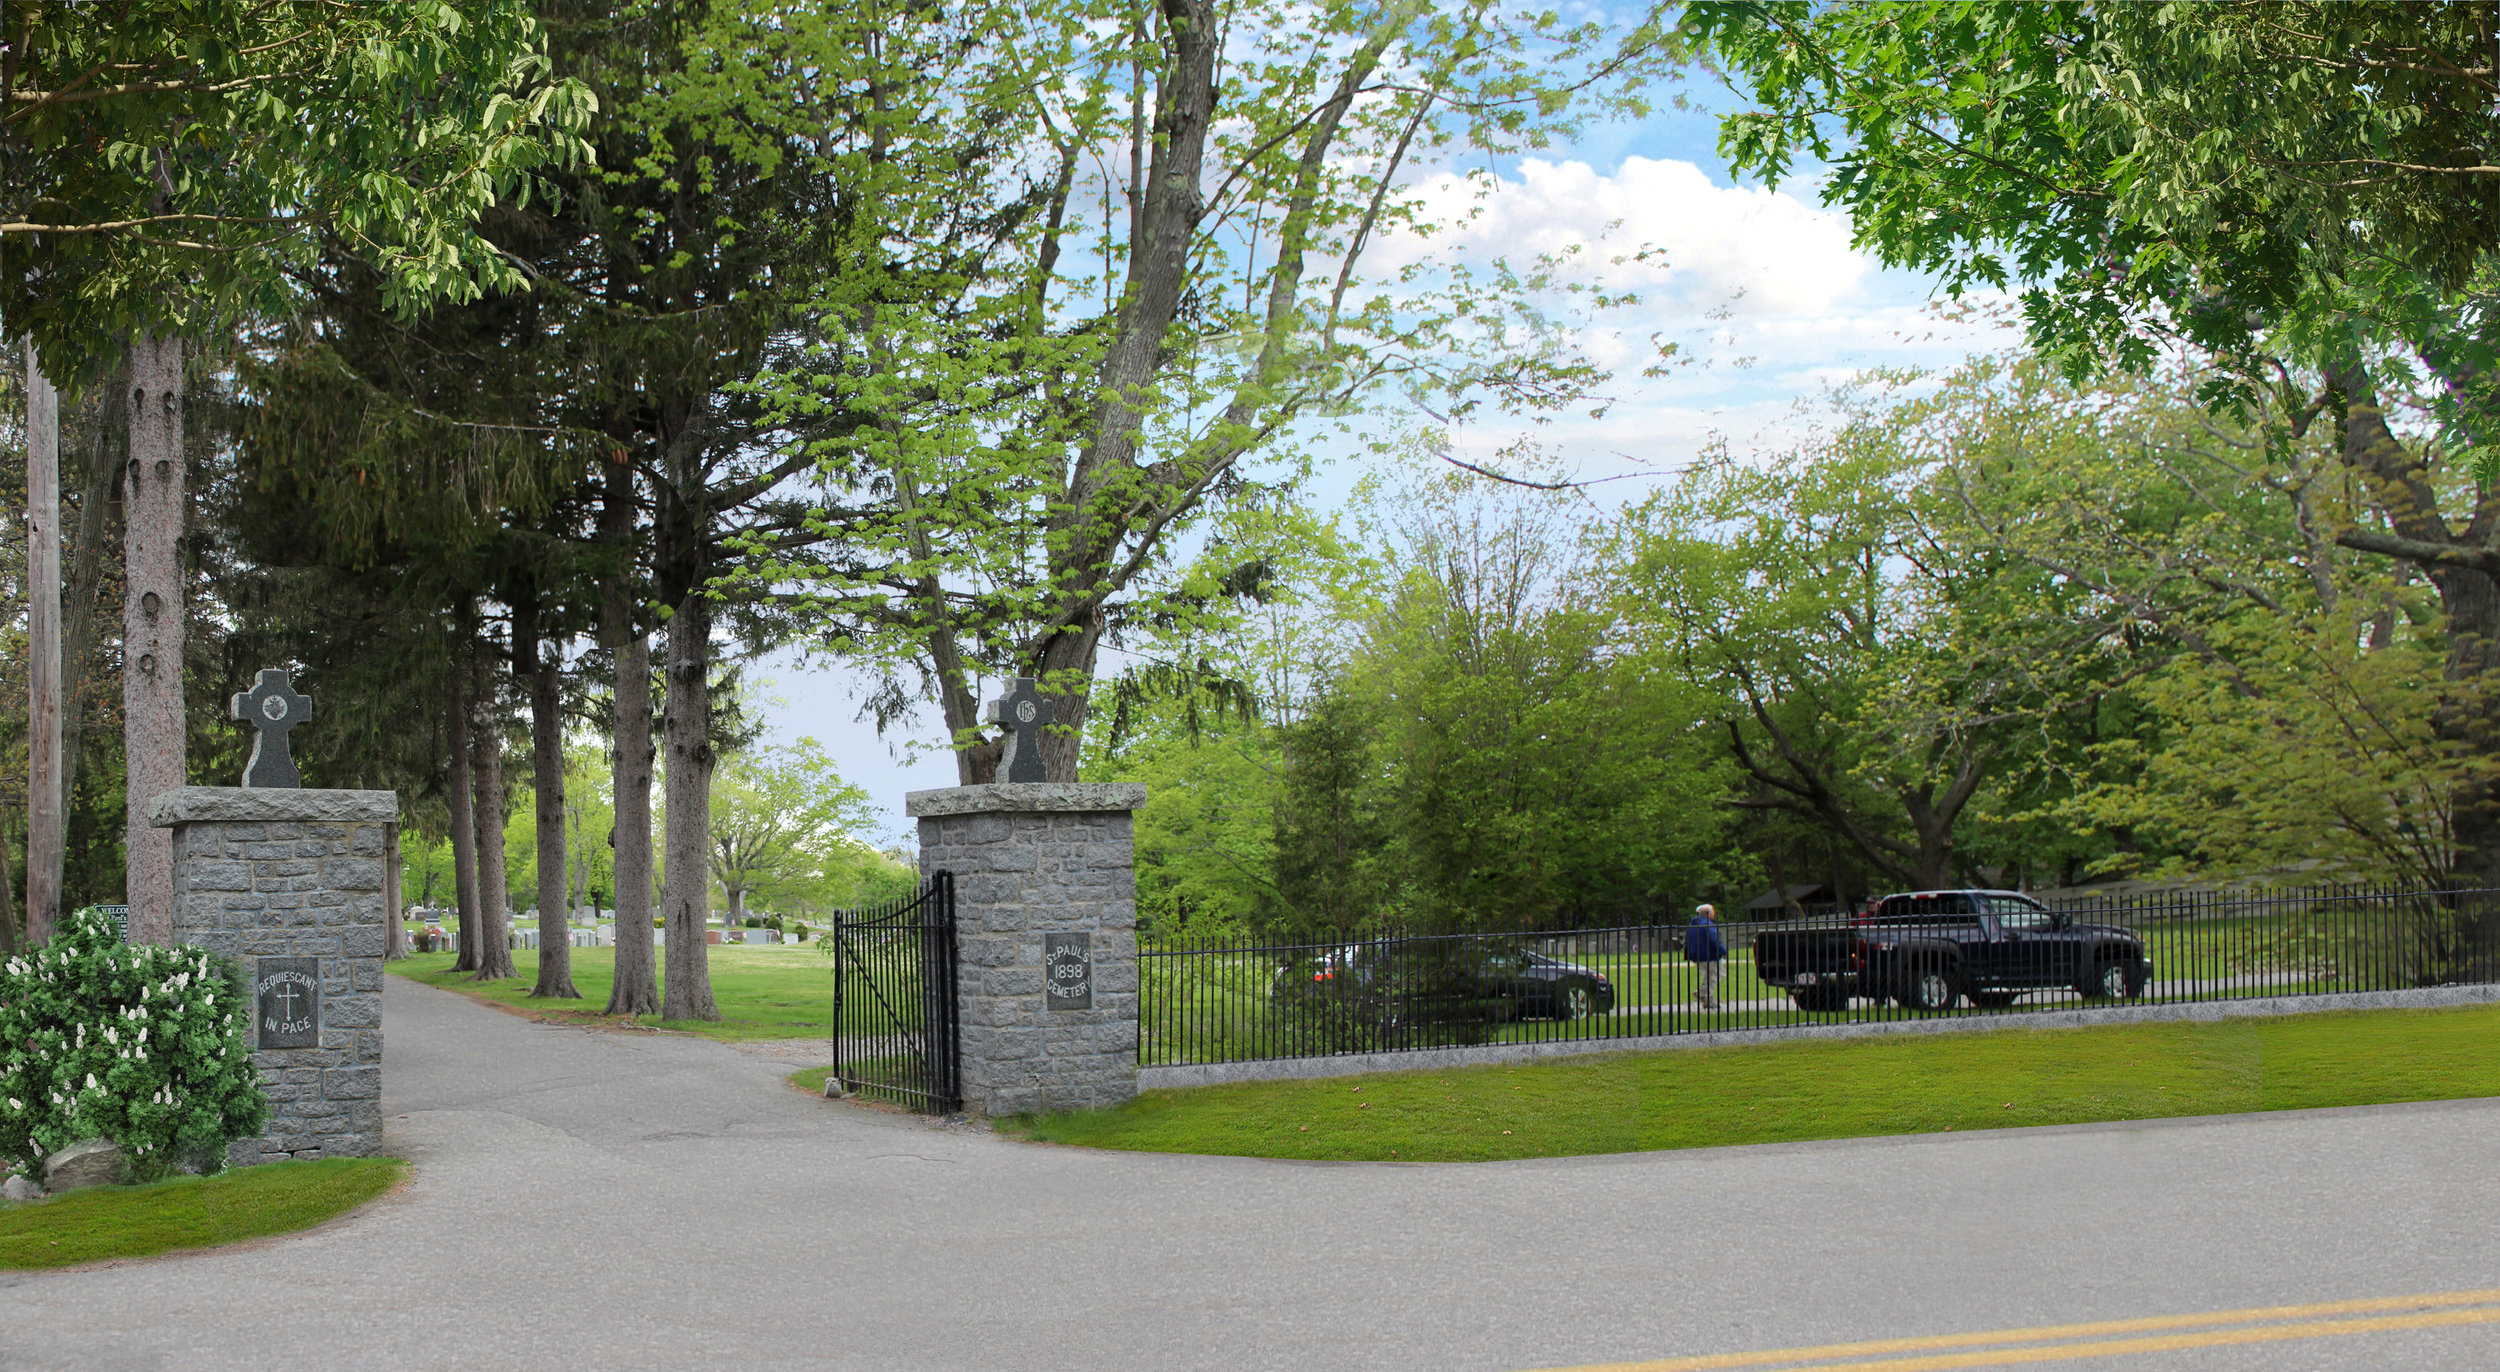  Entry gates at St. Paul Parish Cemetery in Hingham, MA (Rendering by Halvorson Design) 